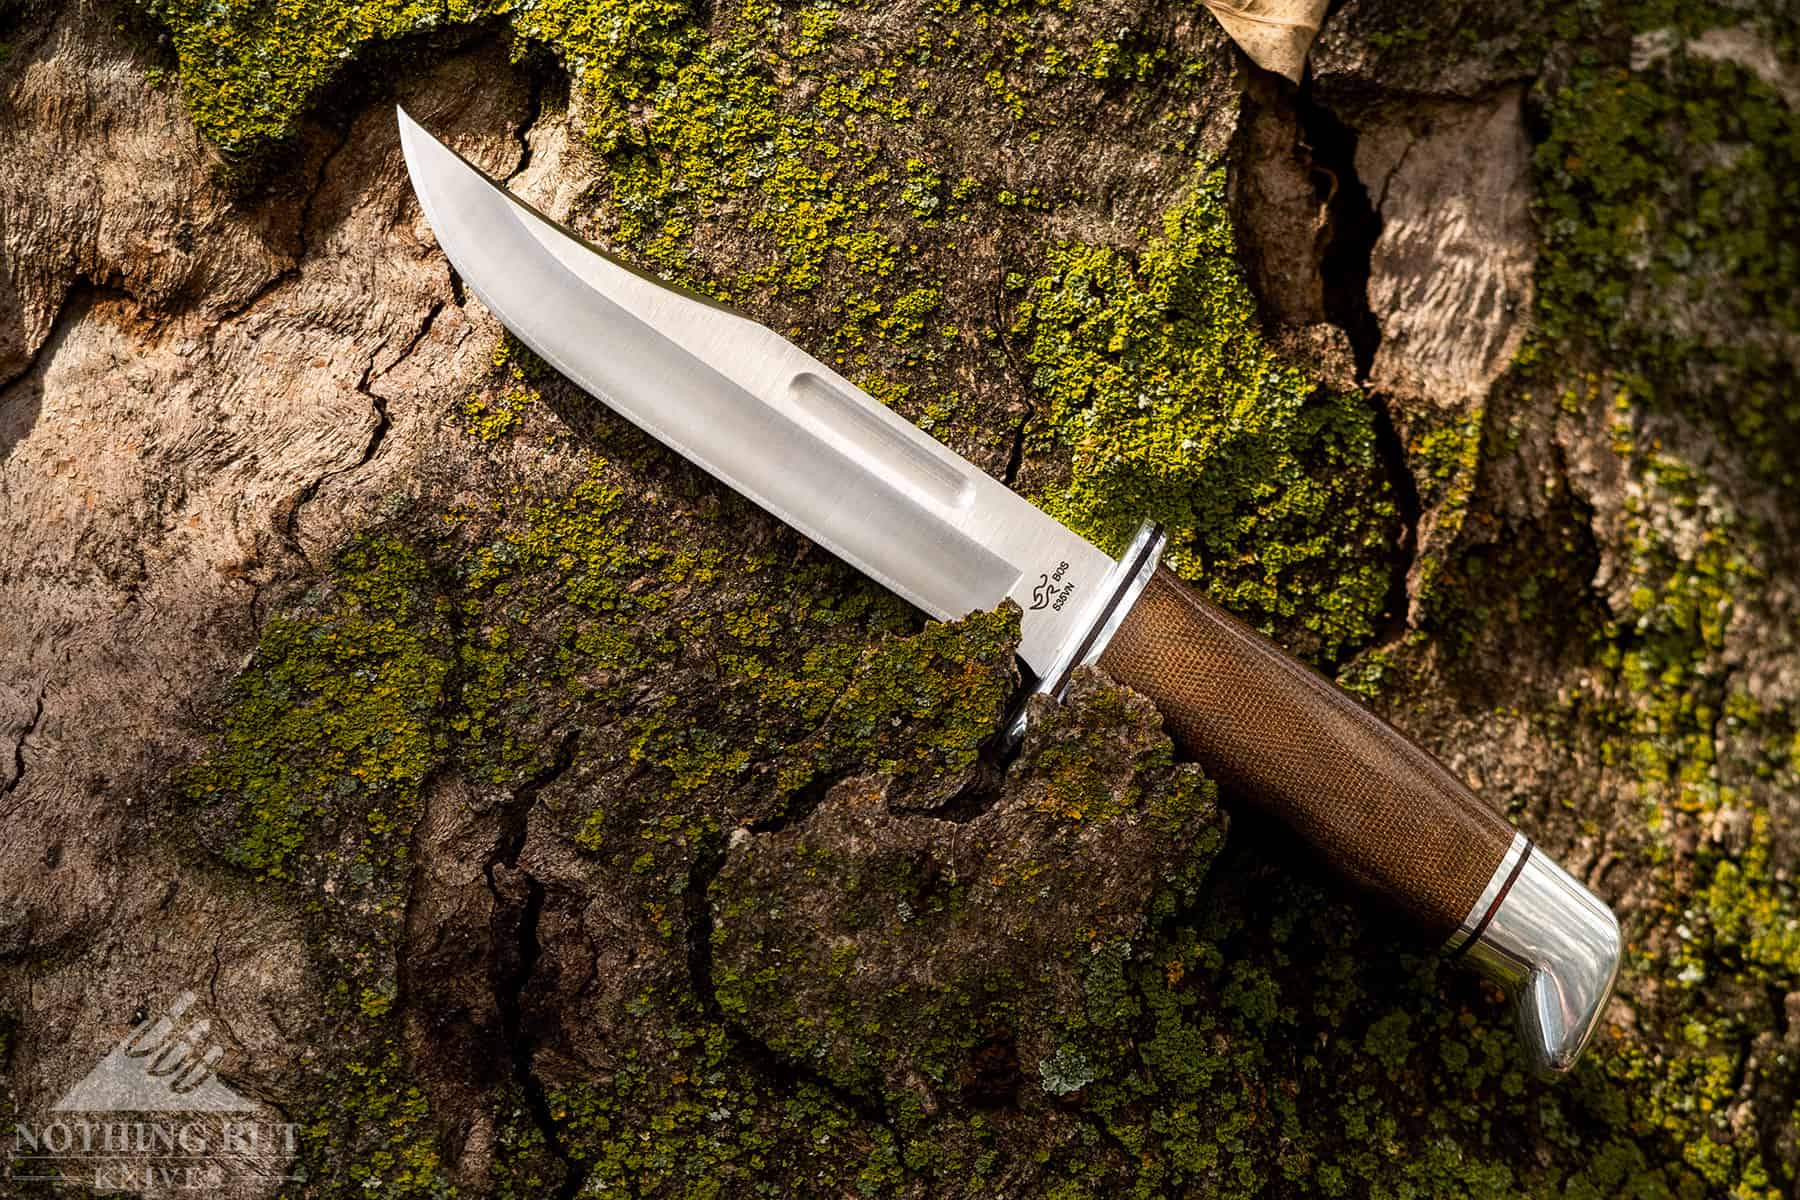 The Special Pro version of the Buck 119 is made of upgraded materials. It has an S35Vn steel blade and a canvas Micarta handle